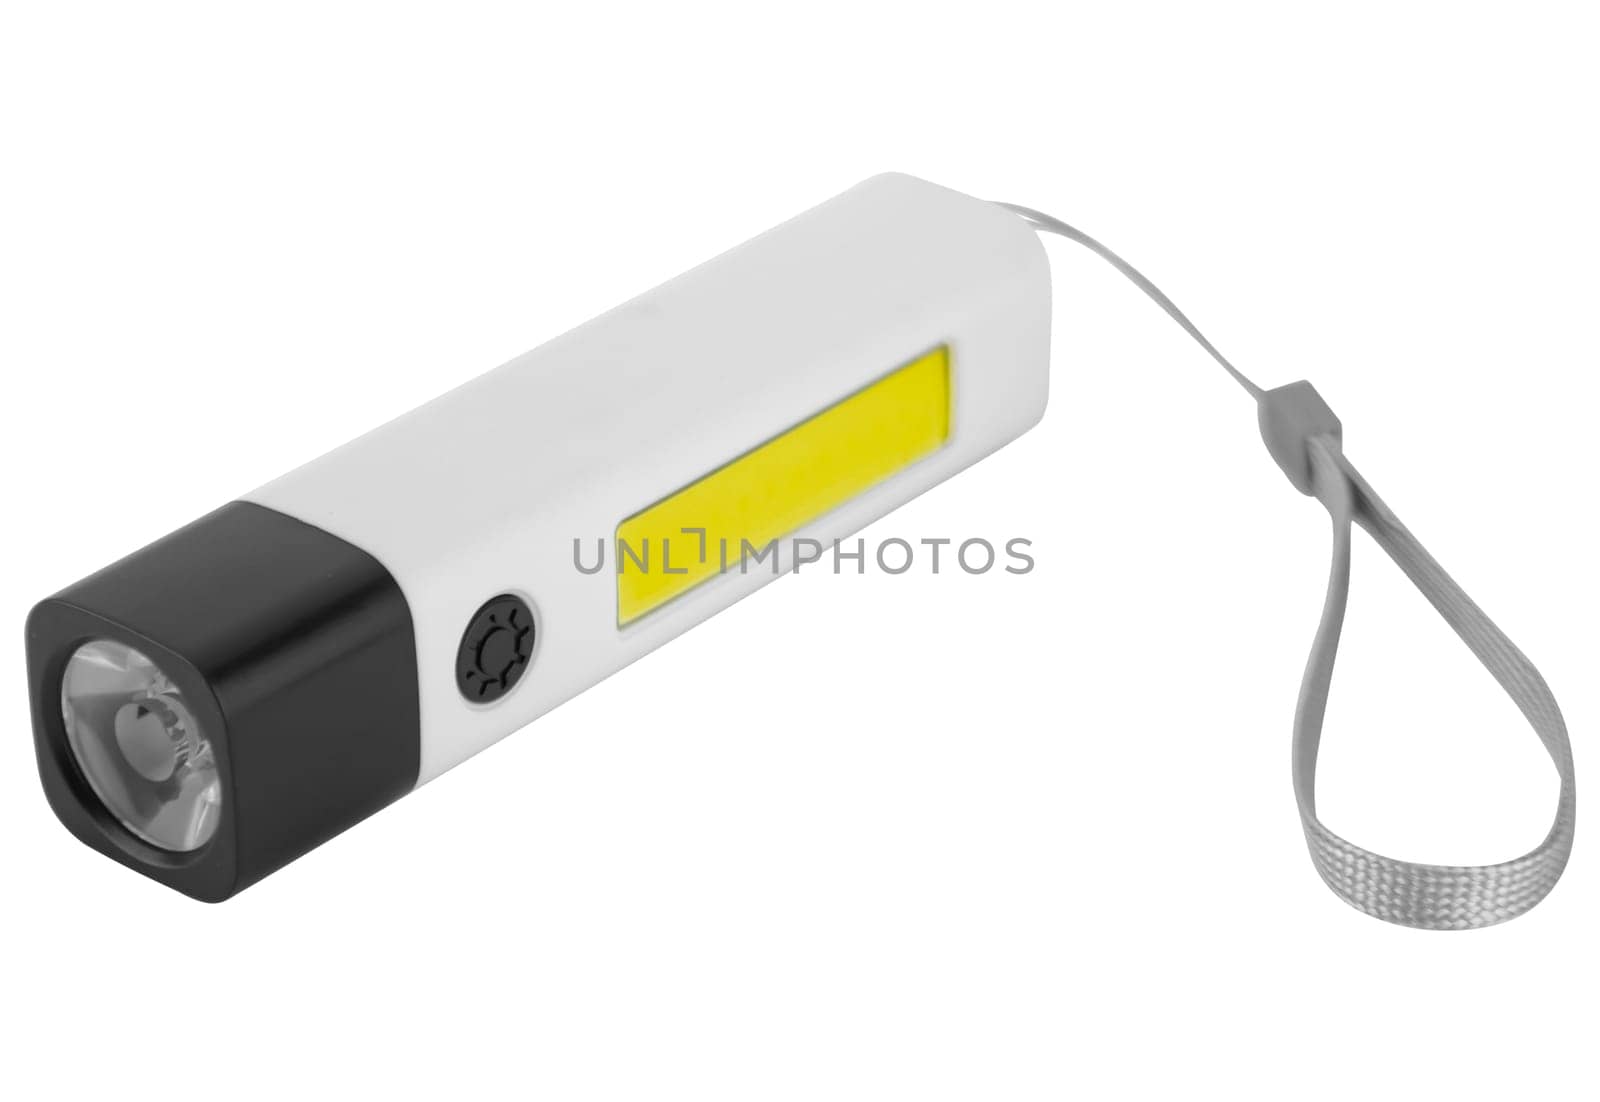 Battery-powered LED hand flashlight, on white background by A_A